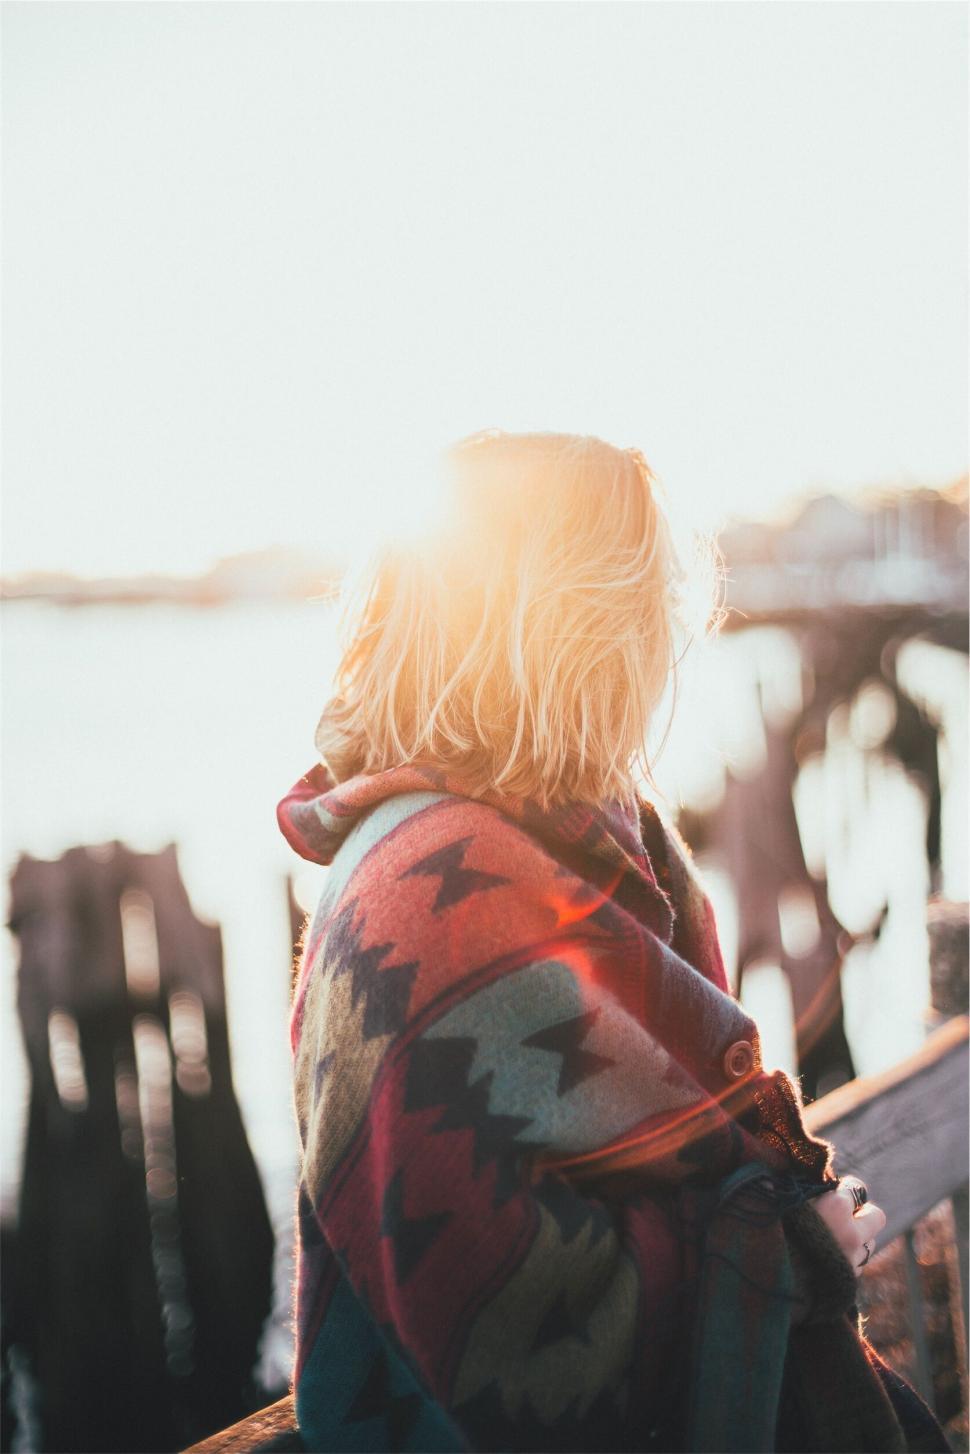 Free Image of Person wrapped in blanket at sunset 